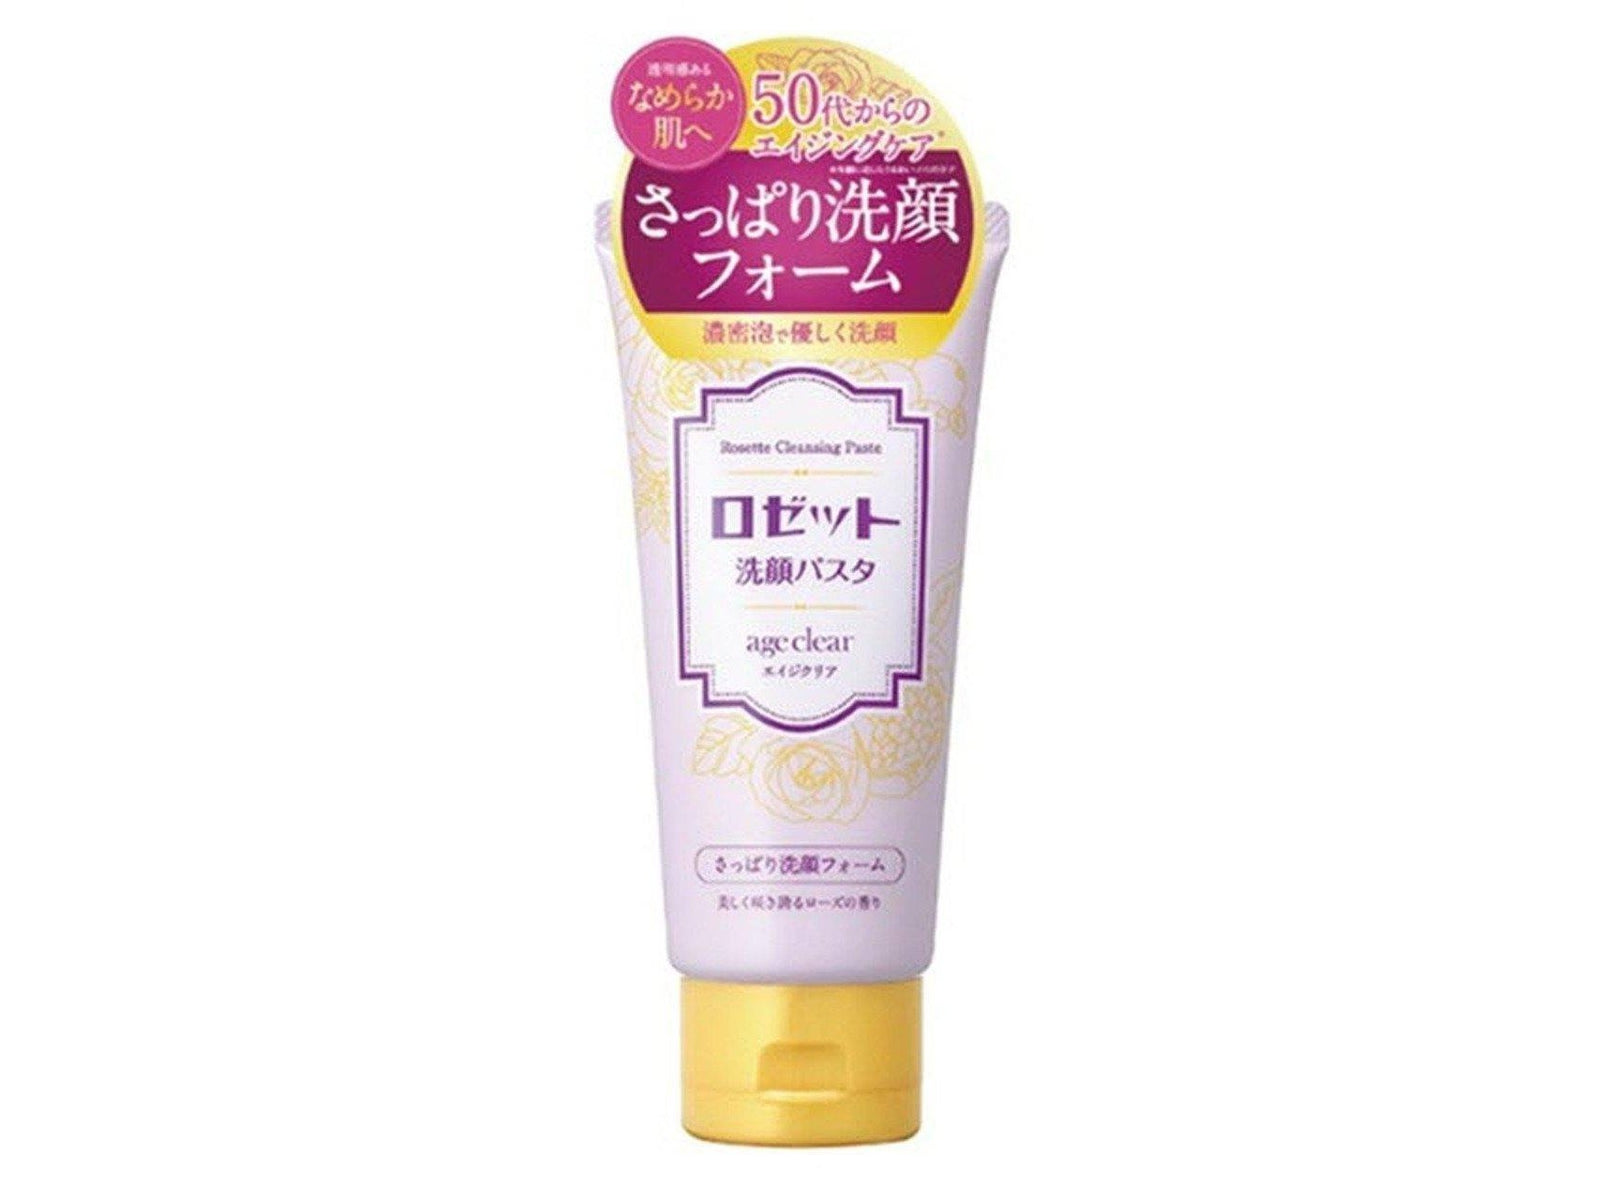 Rosette Cleansing Paste Age Clear